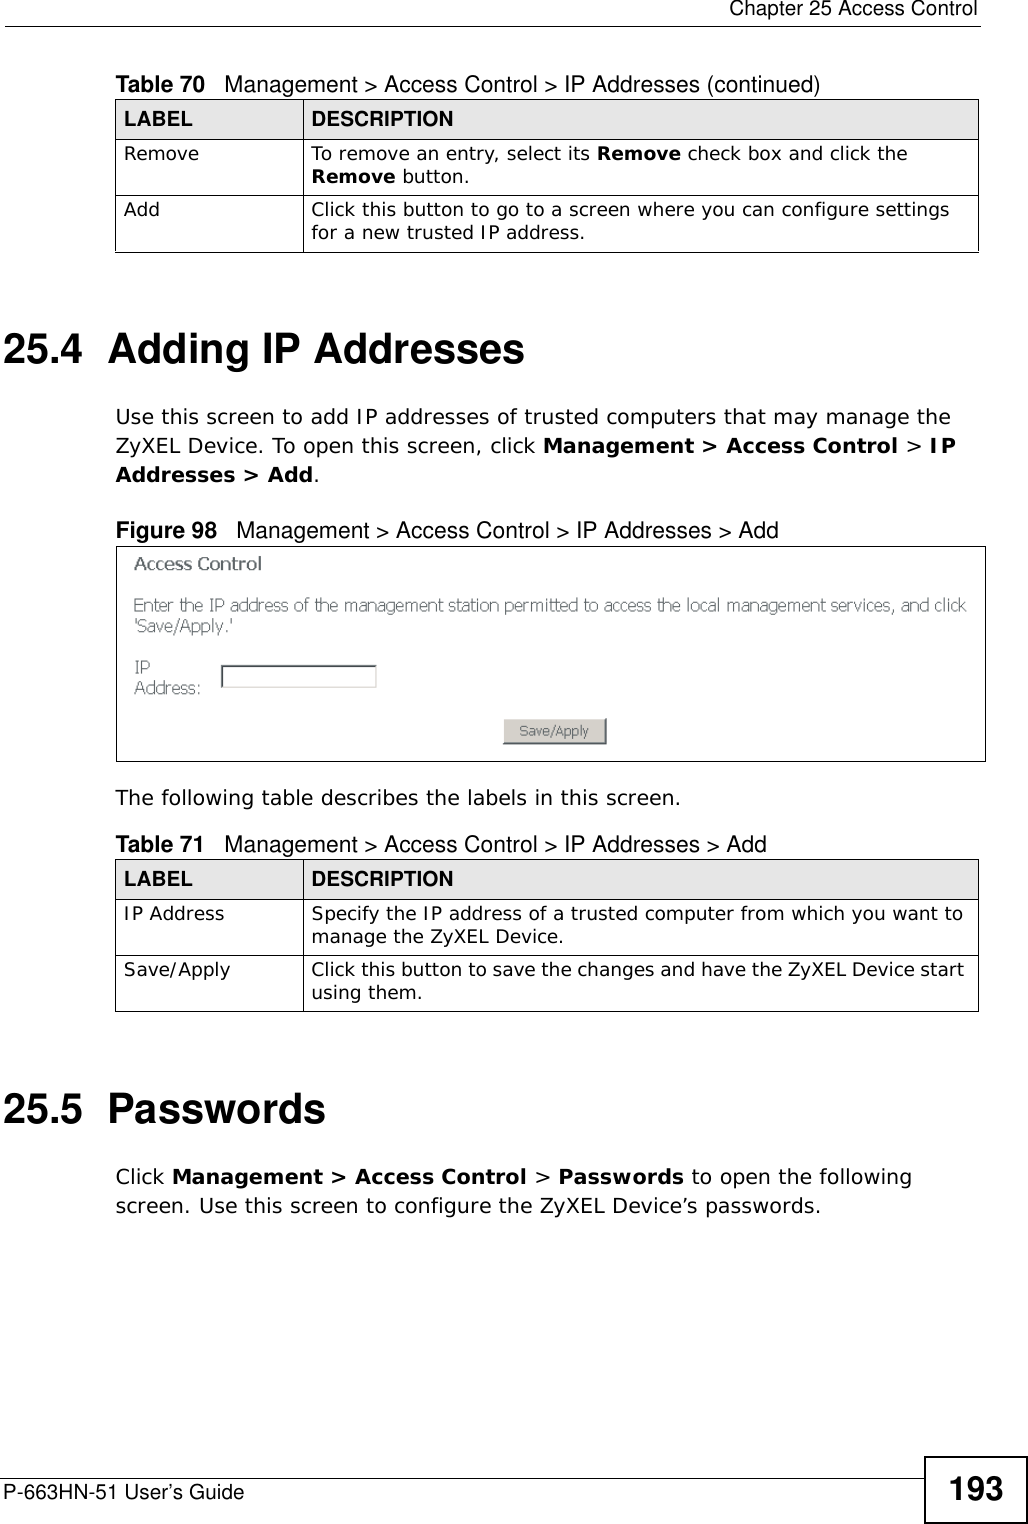  Chapter 25 Access ControlP-663HN-51 User’s Guide 19325.4  Adding IP AddressesUse this screen to add IP addresses of trusted computers that may manage the ZyXEL Device. To open this screen, click Management &gt; Access Control &gt; IP Addresses &gt; Add.Figure 98   Management &gt; Access Control &gt; IP Addresses &gt; AddThe following table describes the labels in this screen.25.5  PasswordsClick Management &gt; Access Control &gt; Passwords to open the following screen. Use this screen to configure the ZyXEL Device’s passwords. Remove To remove an entry, select its Remove check box and click the Remove button. Add Click this button to go to a screen where you can configure settings for a new trusted IP address.Table 70   Management &gt; Access Control &gt; IP Addresses (continued)LABEL DESCRIPTIONTable 71   Management &gt; Access Control &gt; IP Addresses &gt; AddLABEL DESCRIPTIONIP Address Specify the IP address of a trusted computer from which you want to manage the ZyXEL Device.Save/Apply Click this button to save the changes and have the ZyXEL Device start using them.